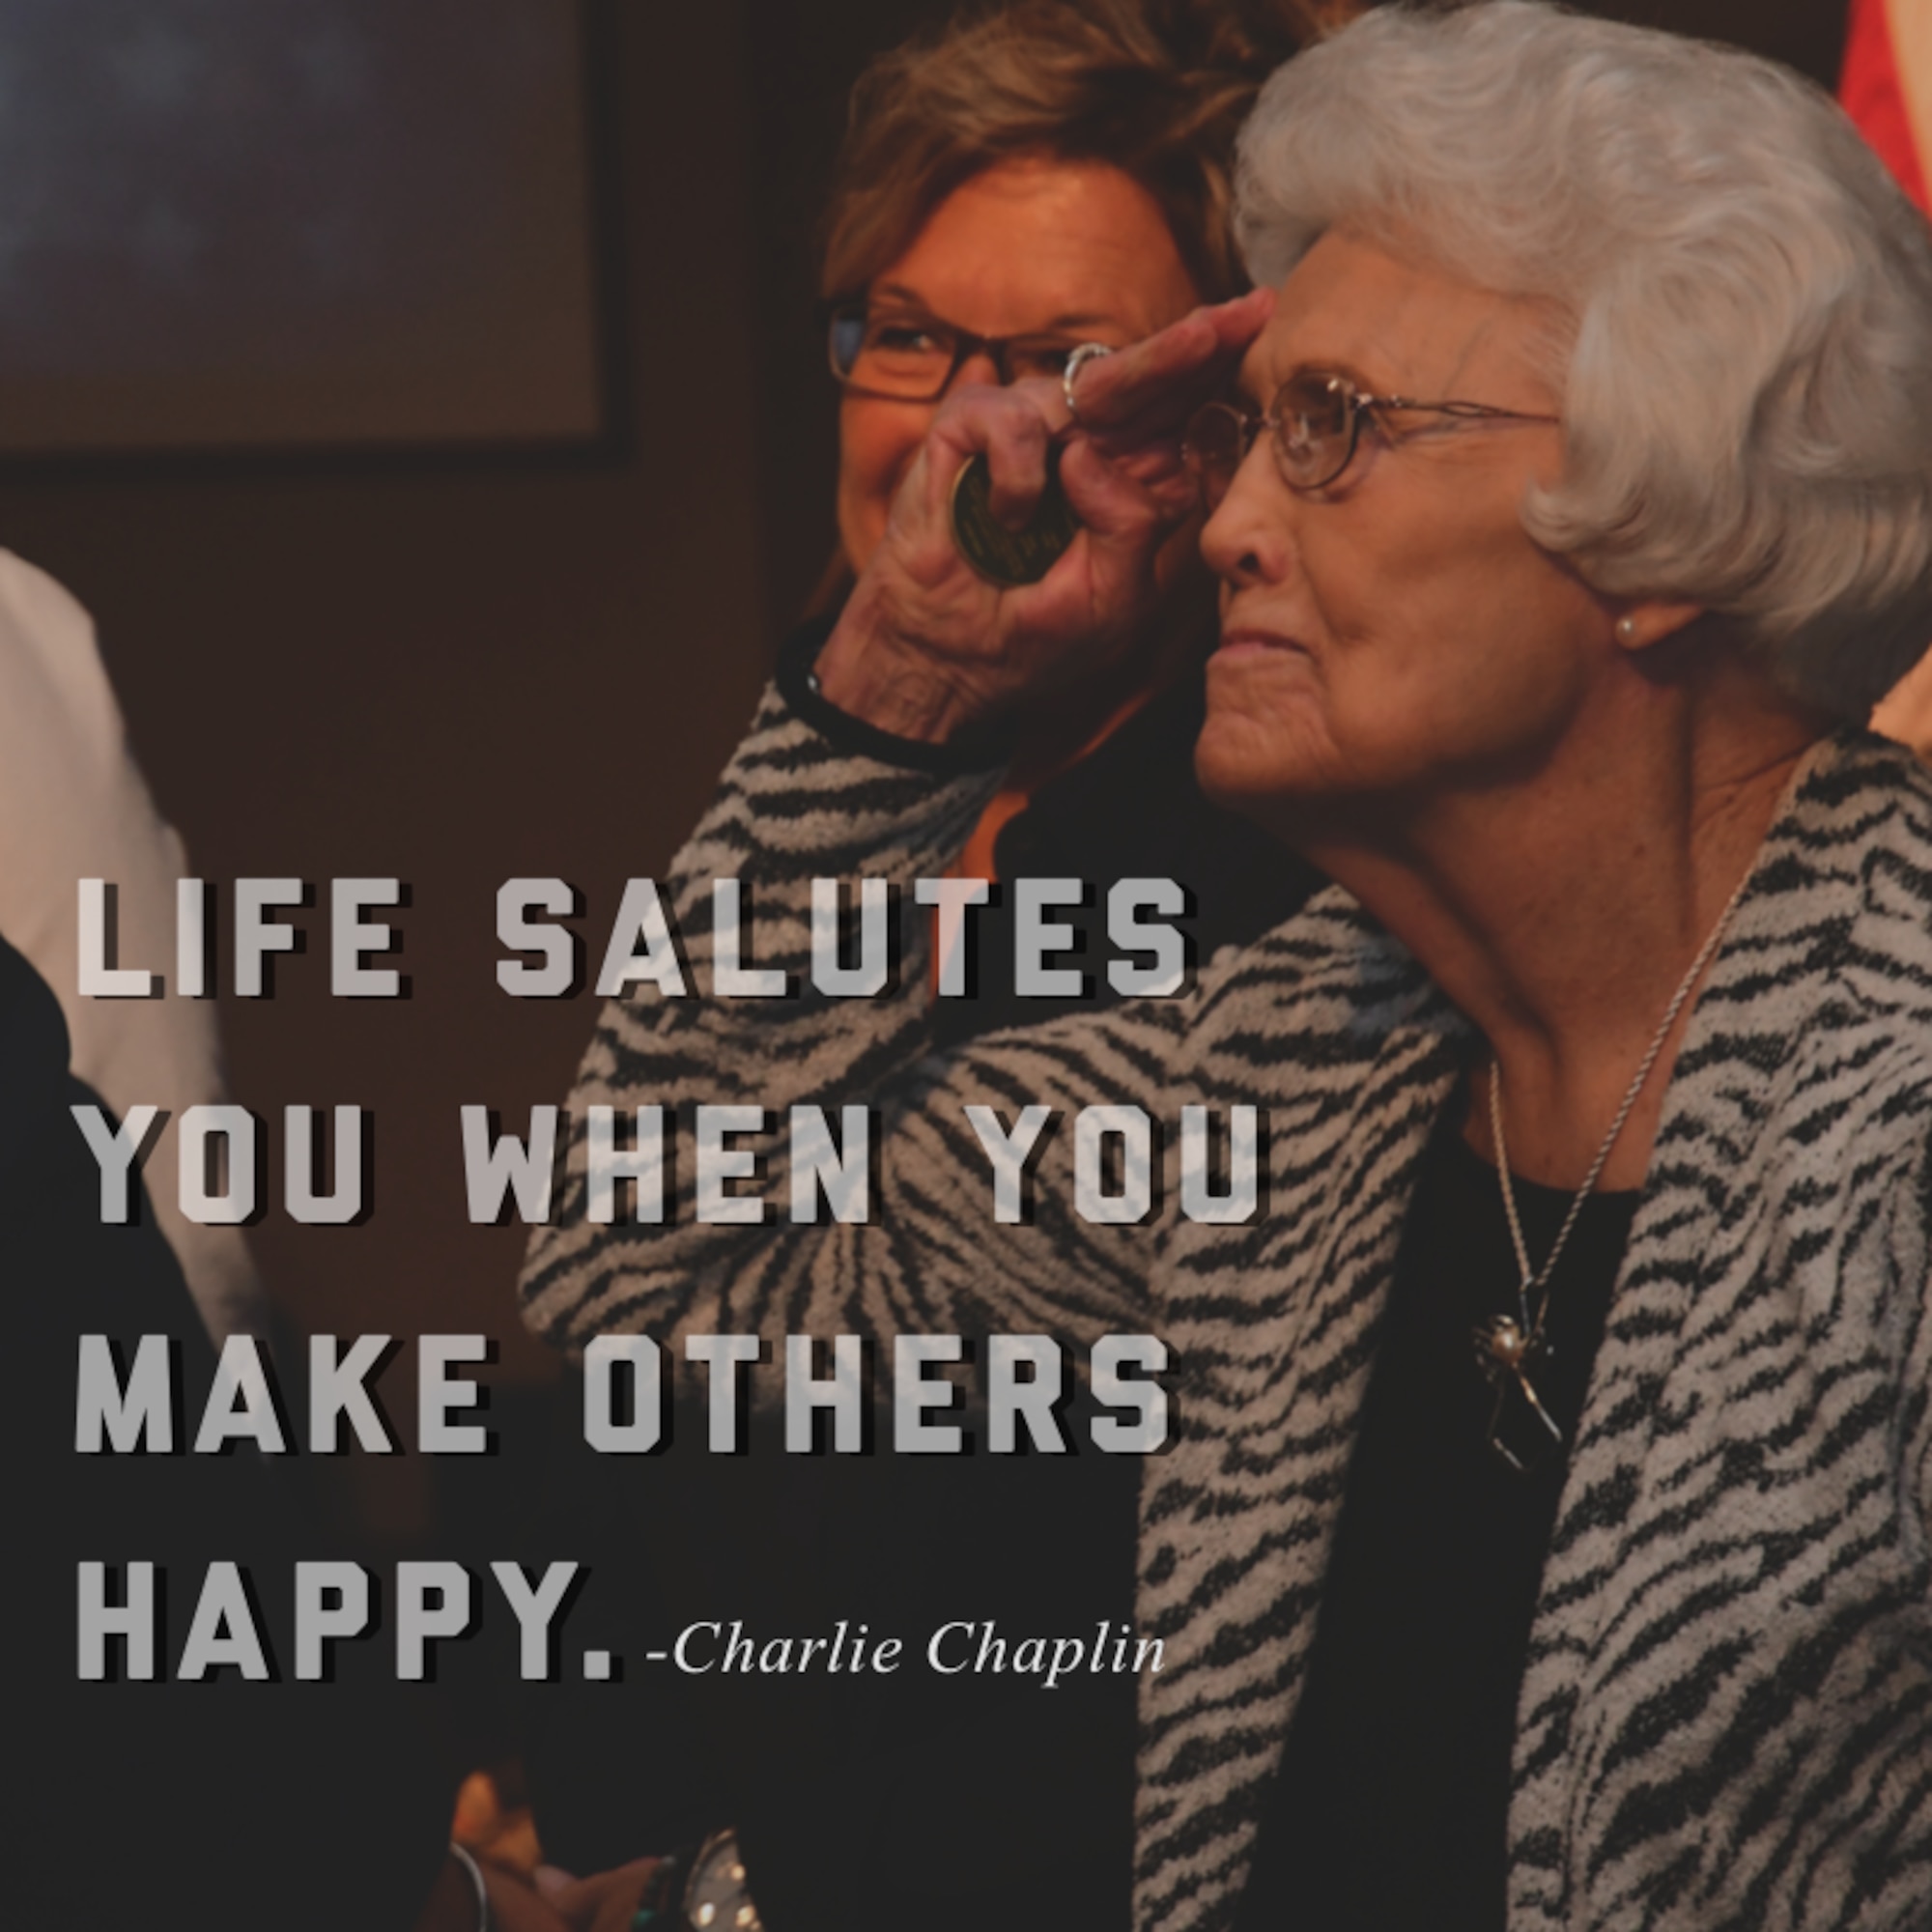 This week's motivation is courtesy of comedic actor, Charlie Chaplin, who said, "Life salutes you when you make others happy." (U.S. Air Force graphic/Tech. Sgt. Andrew Park)